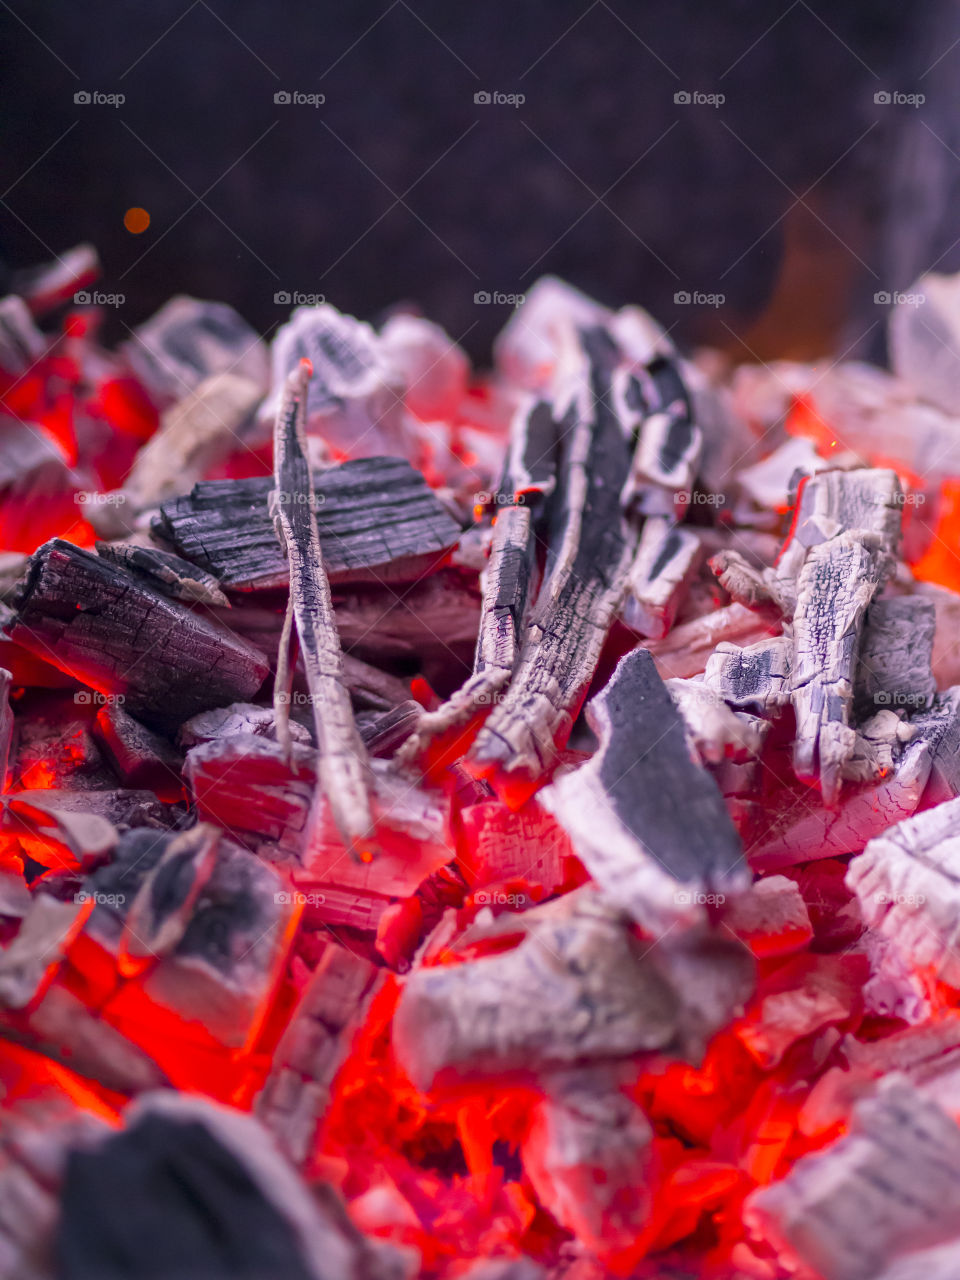 A burning fire burns to coals with a bright red-yellow flame for roasting meat.